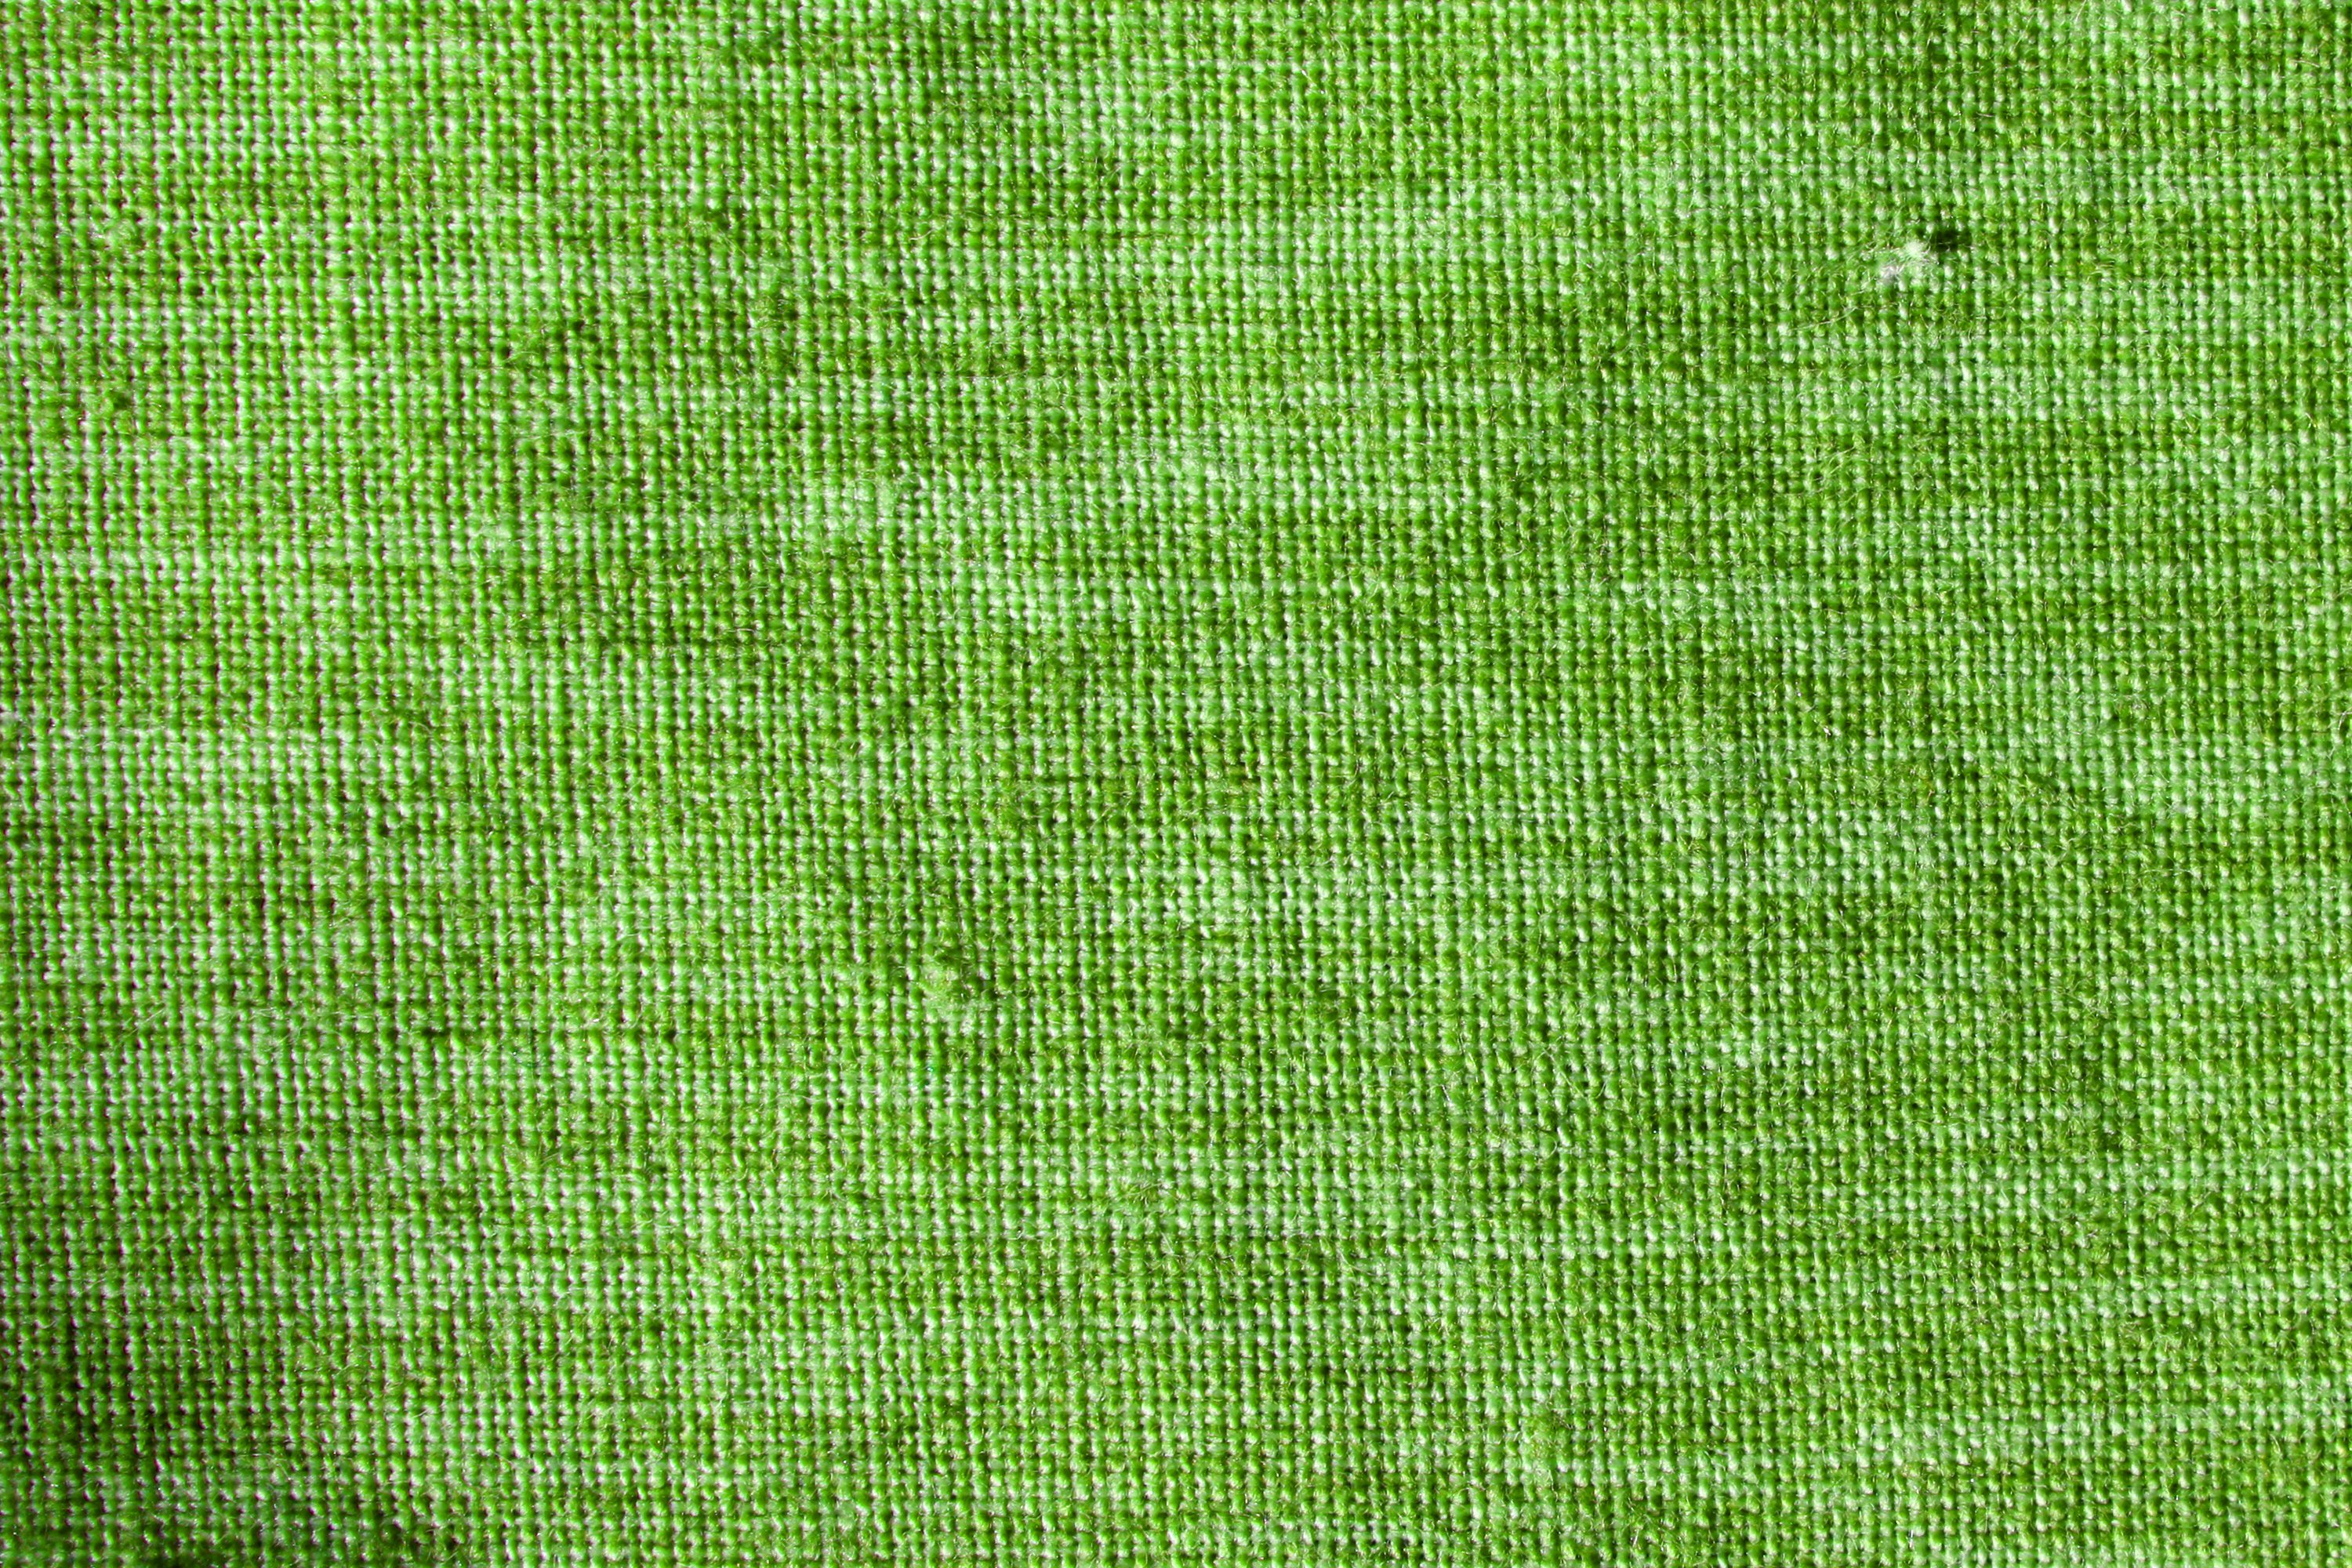 Lime Green Woven Fabric Close Up Texture Picture Free Photograph